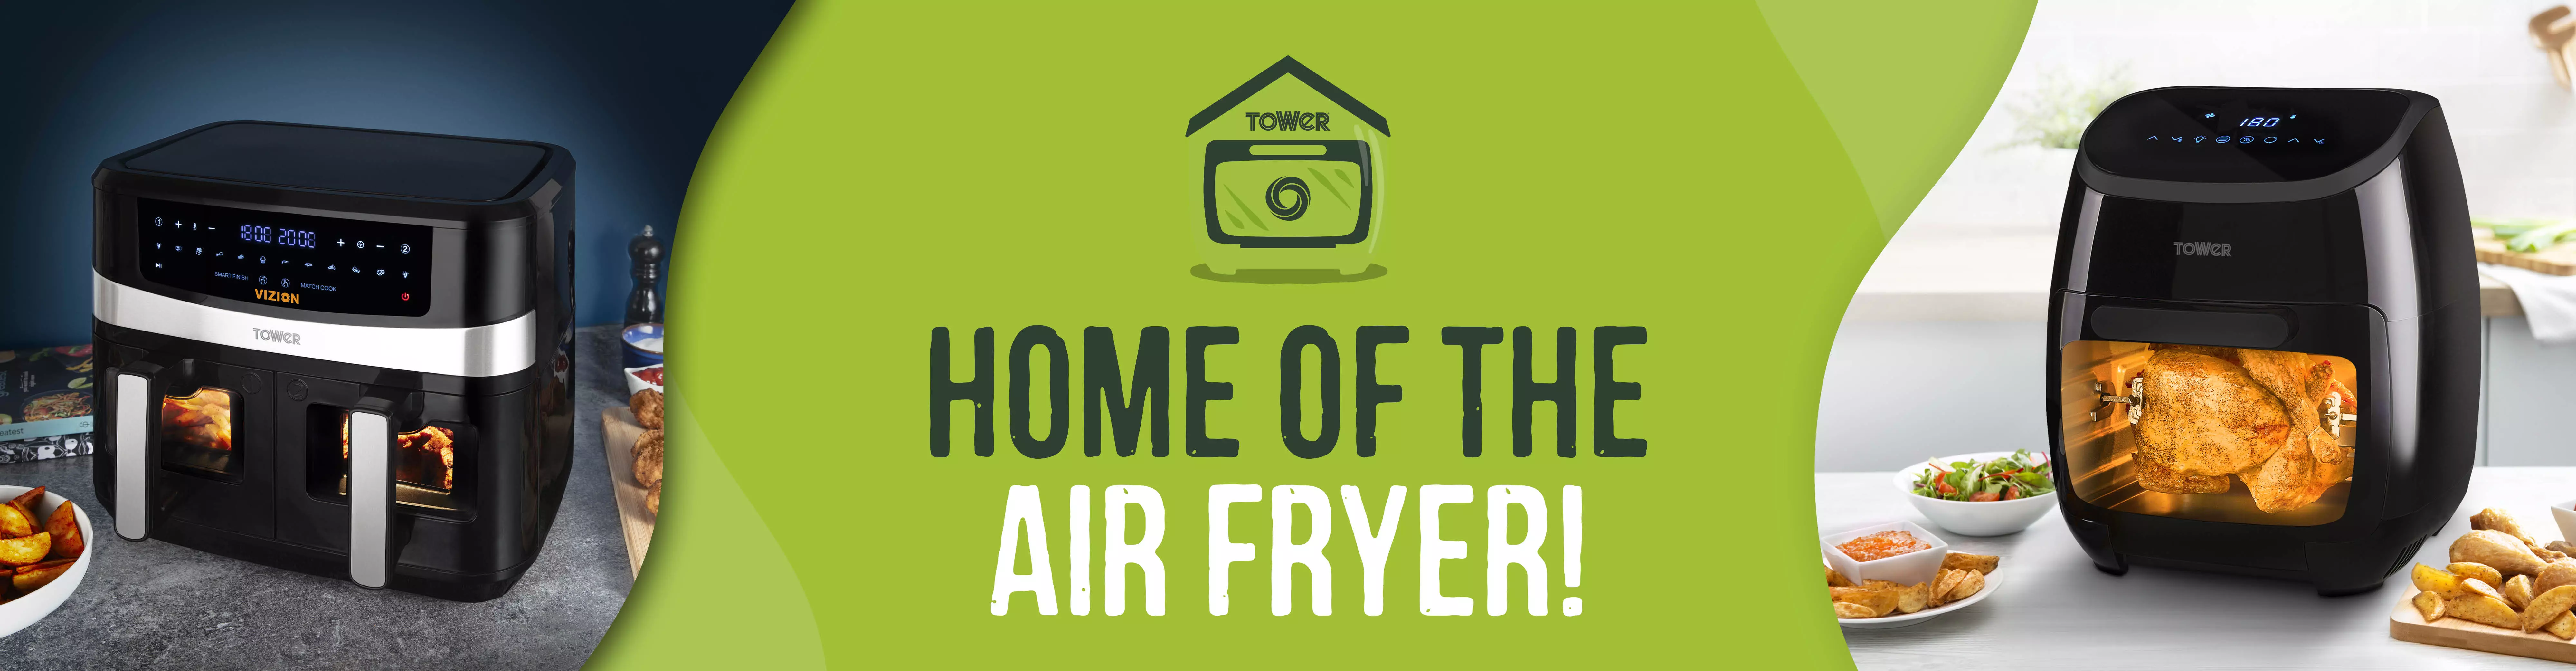 Home of the Air Fryer Banner 1920x500px.jpg